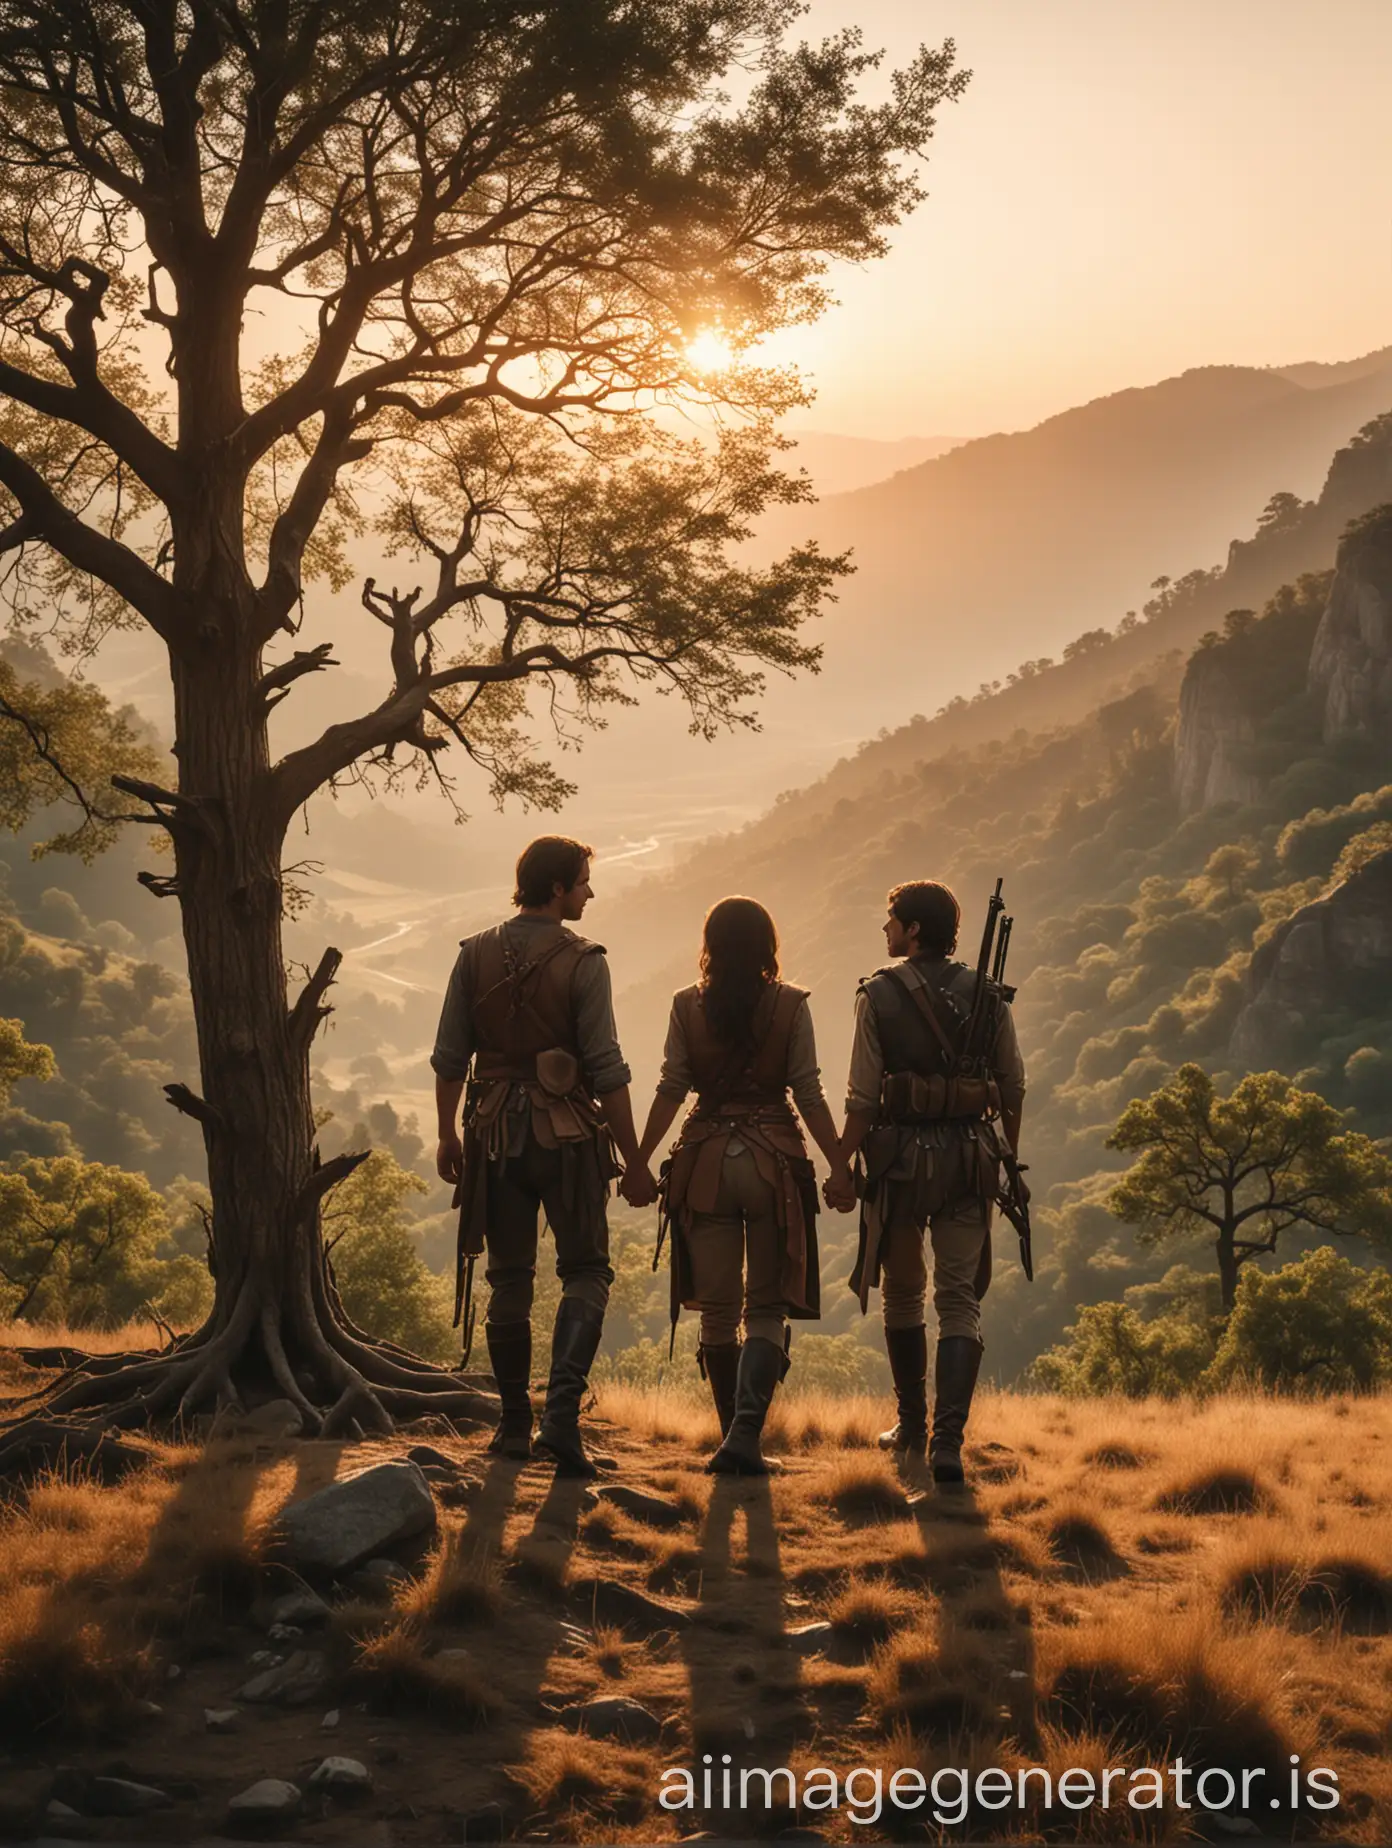 Man and woman holding hands looking down over a vast, tree-filled valley, backlit by a soft sunset. They are wearing soft padded breastplates and comfortable pants, with long barrelled rifles strapped to their backs.